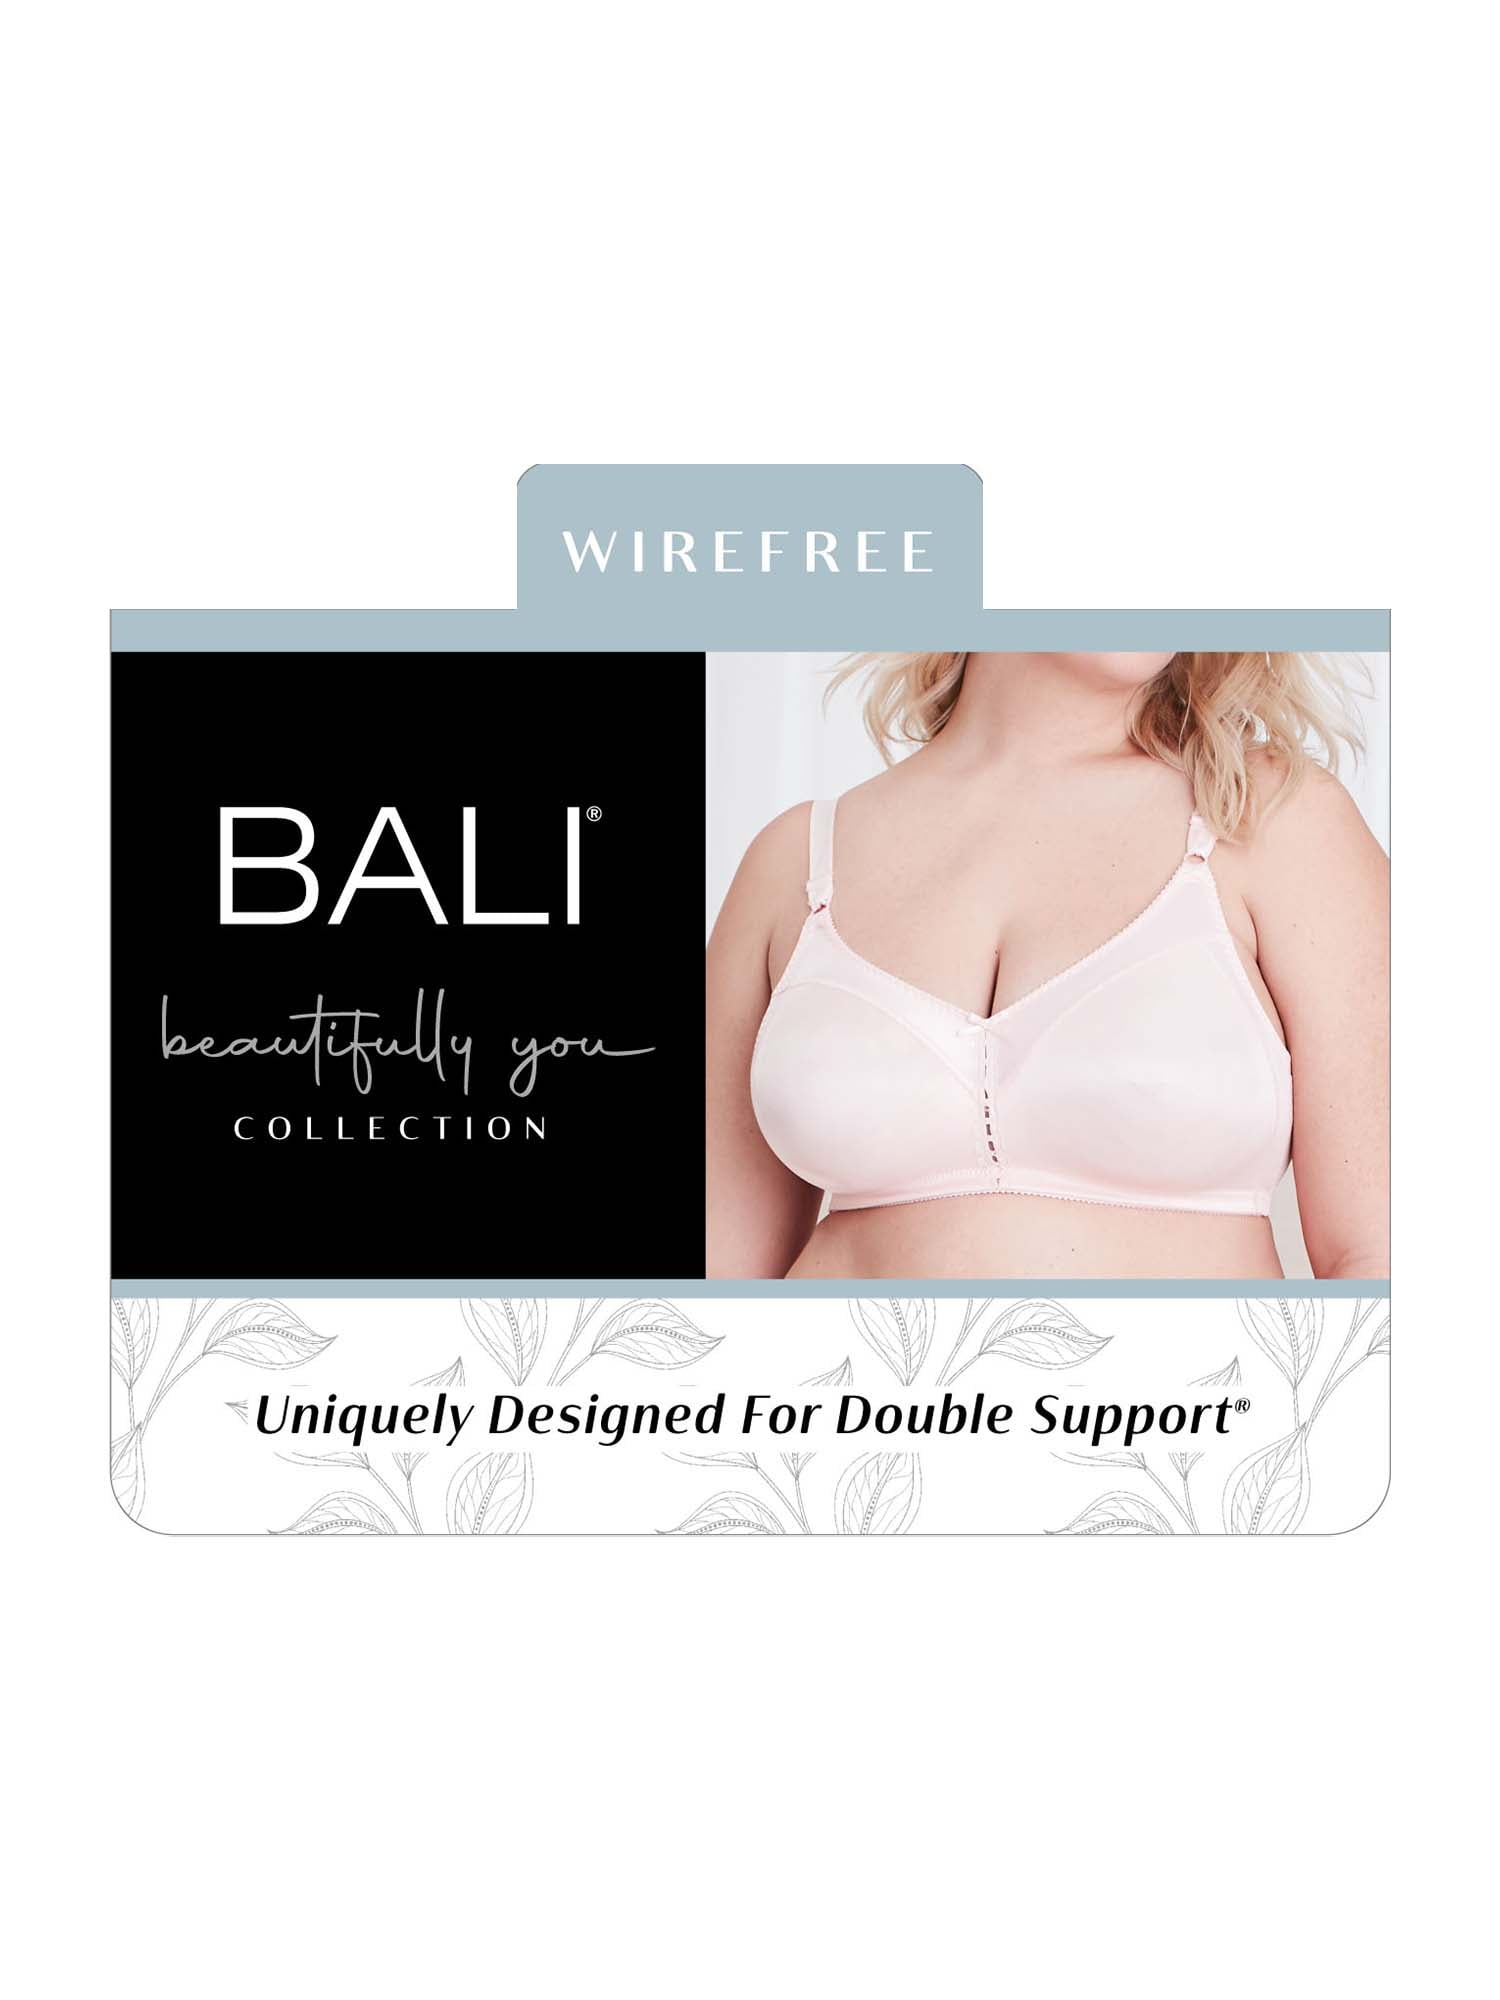 Bali Bras - Meet the bra you can style multiple ways. Full